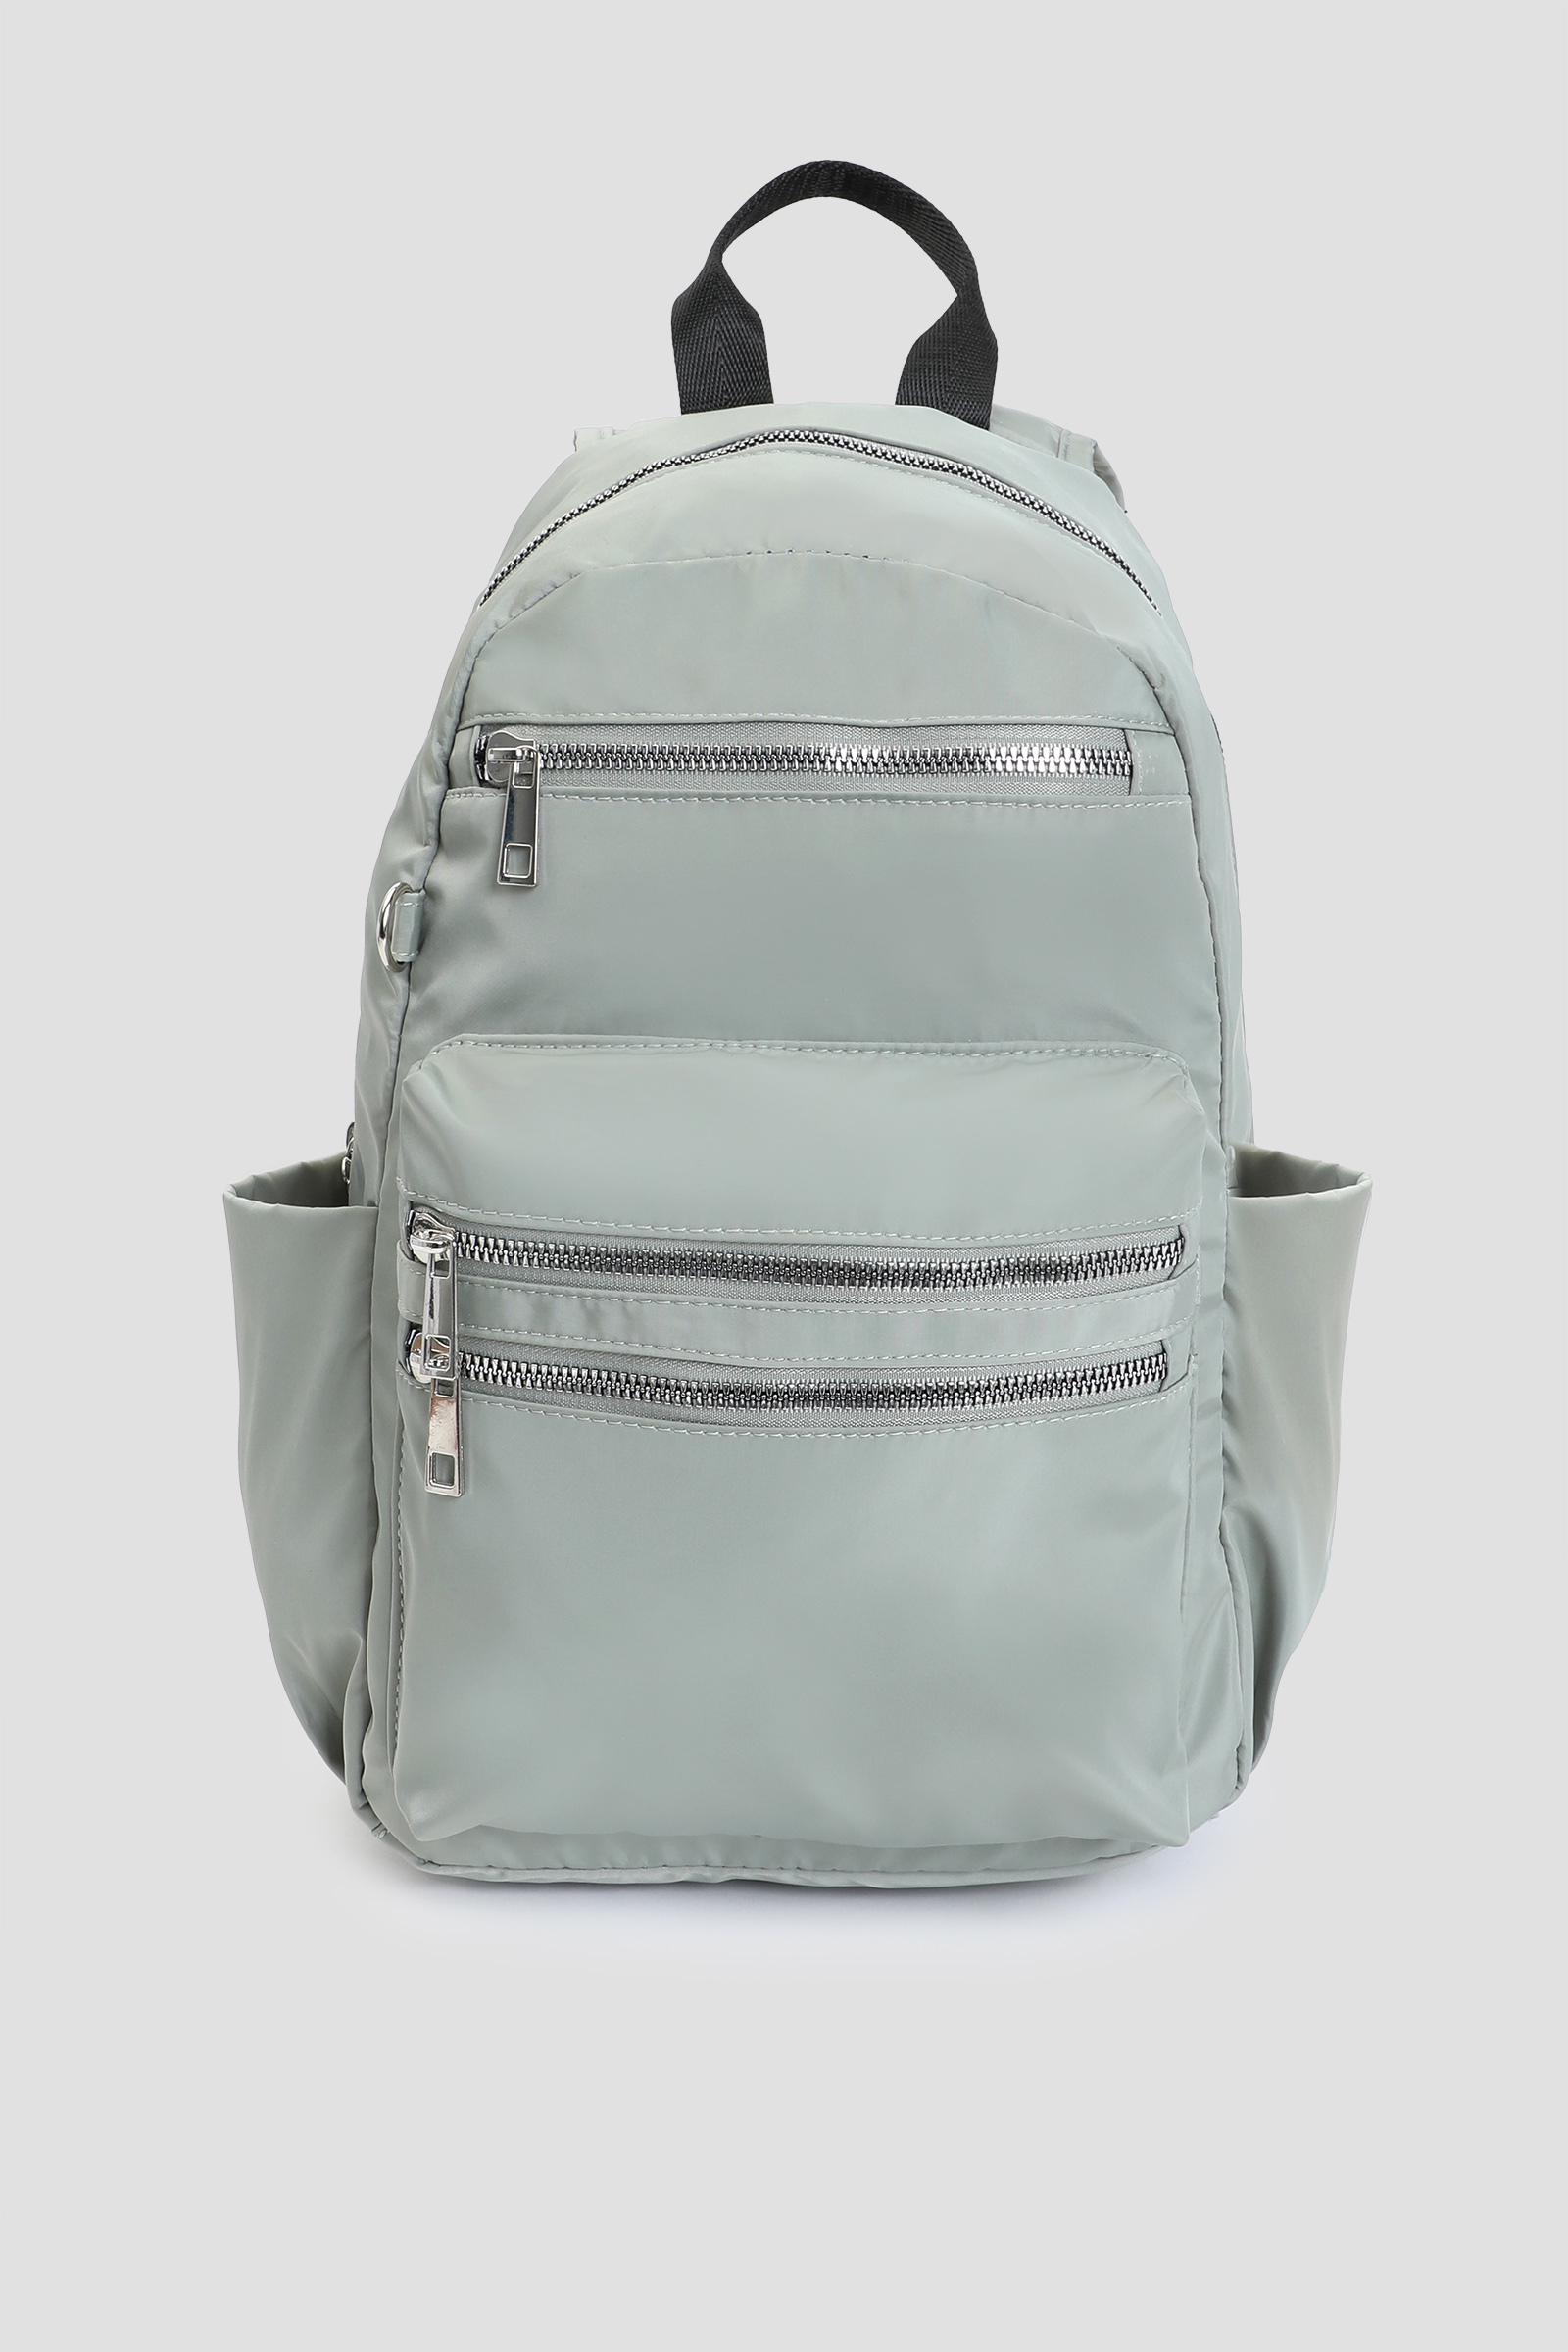 Ardene Nylon Backpack with Multiple Pockets in Light Green | 100% Recycled Polyester/Nylon | Eco-Conscious